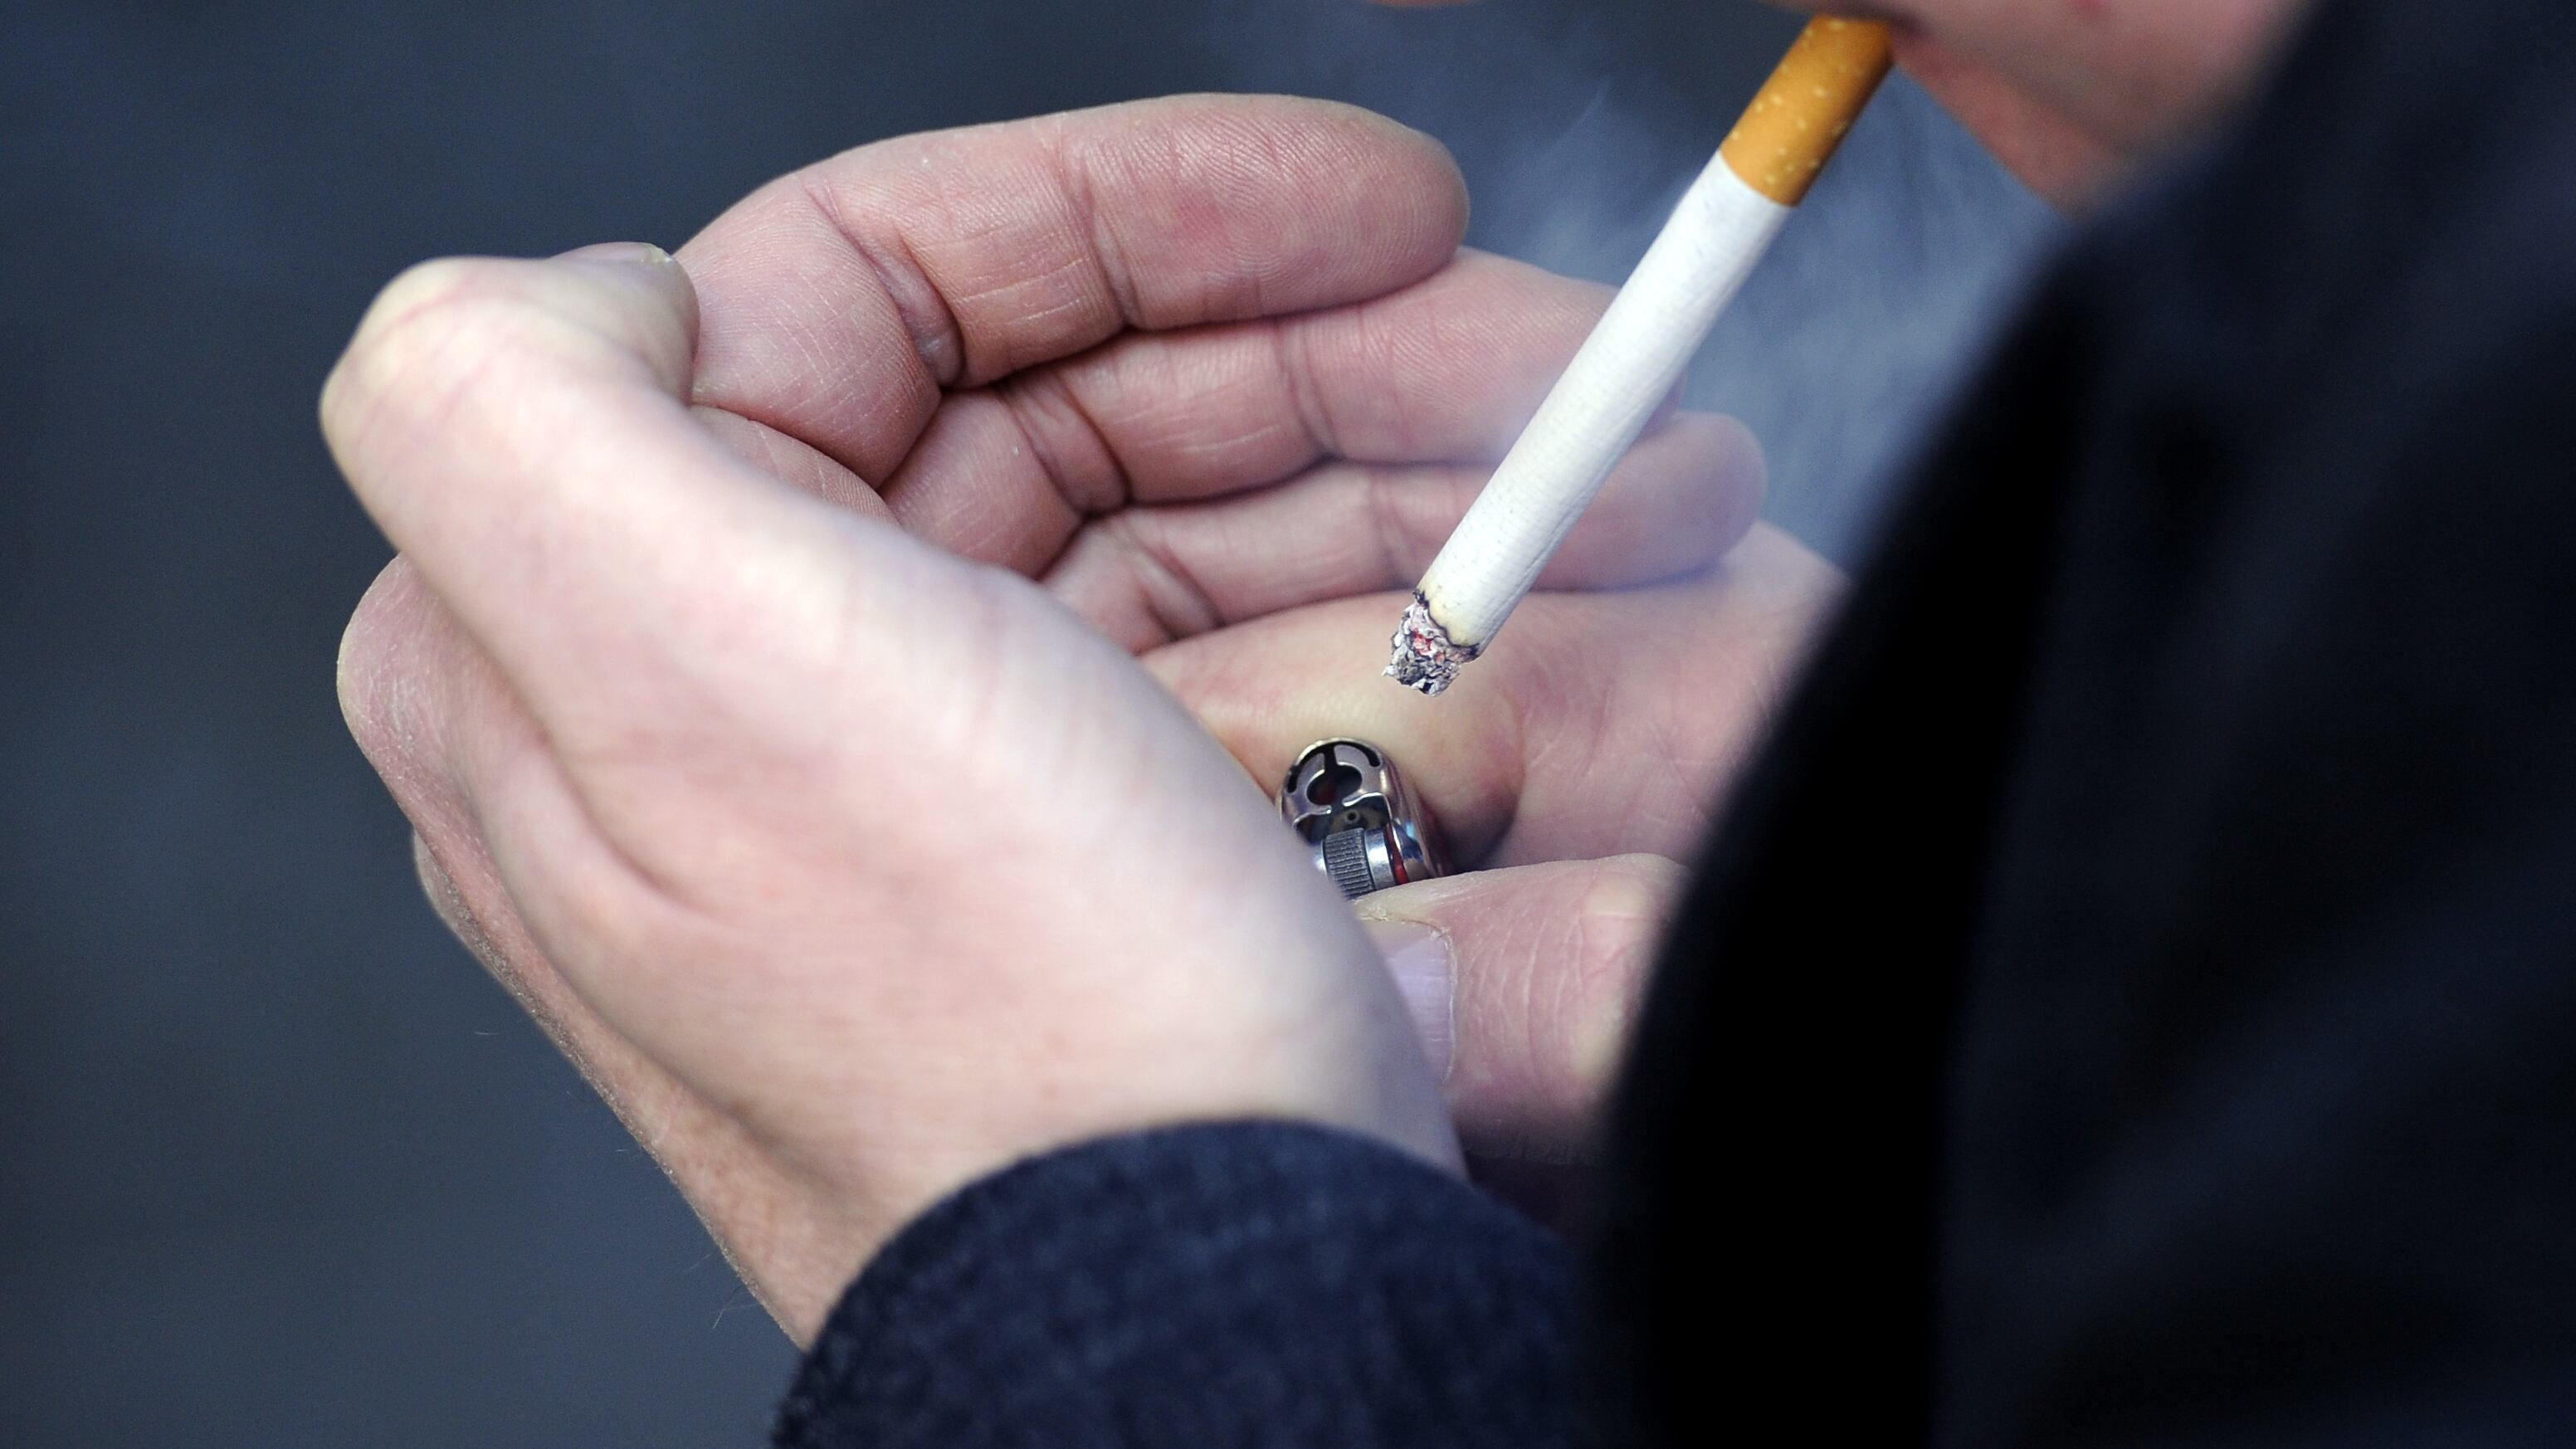 Charities have urged political parties to commit to putting the smoking ban into their manifestos